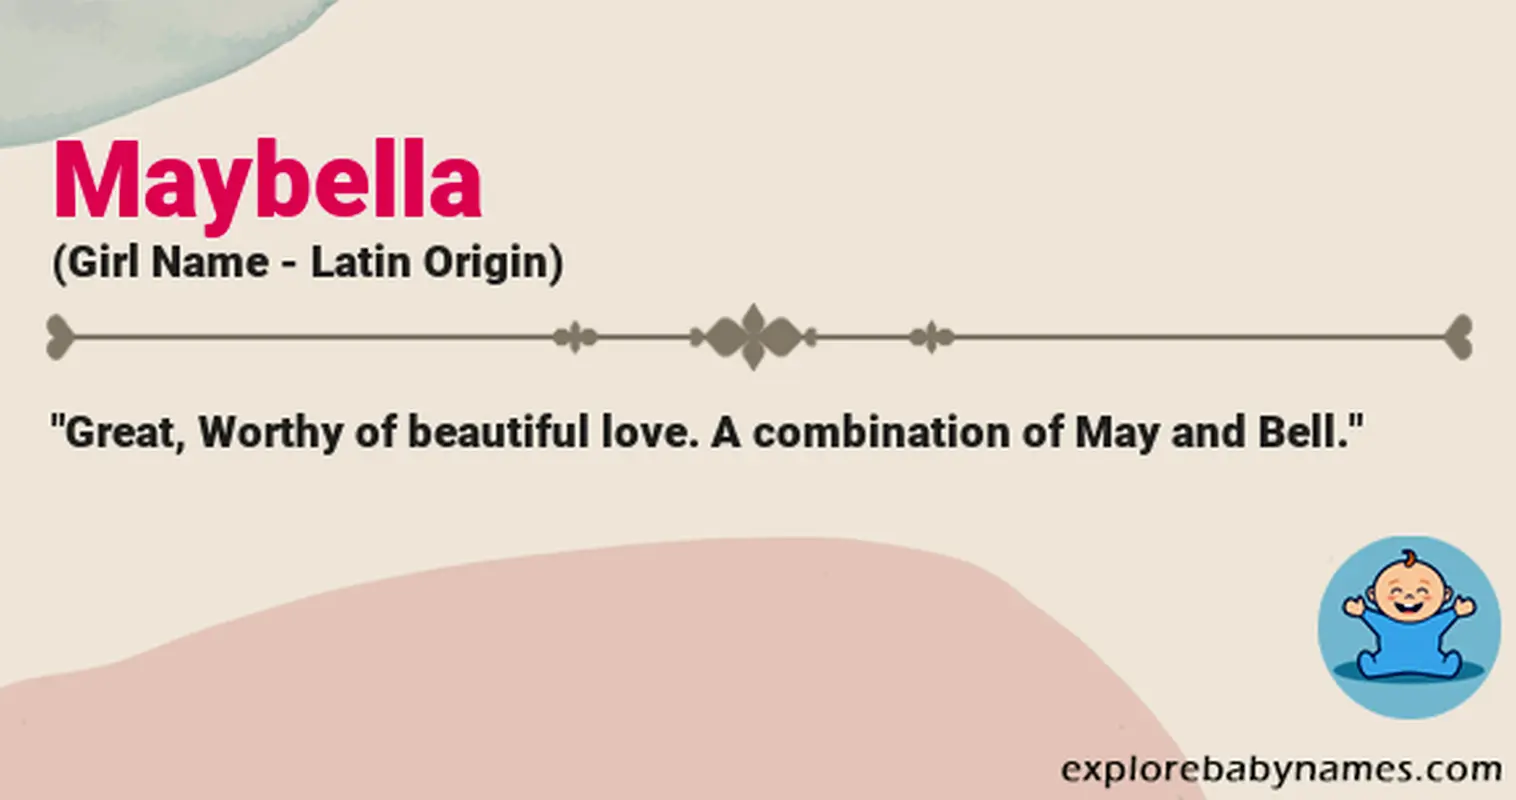 Meaning of Maybella